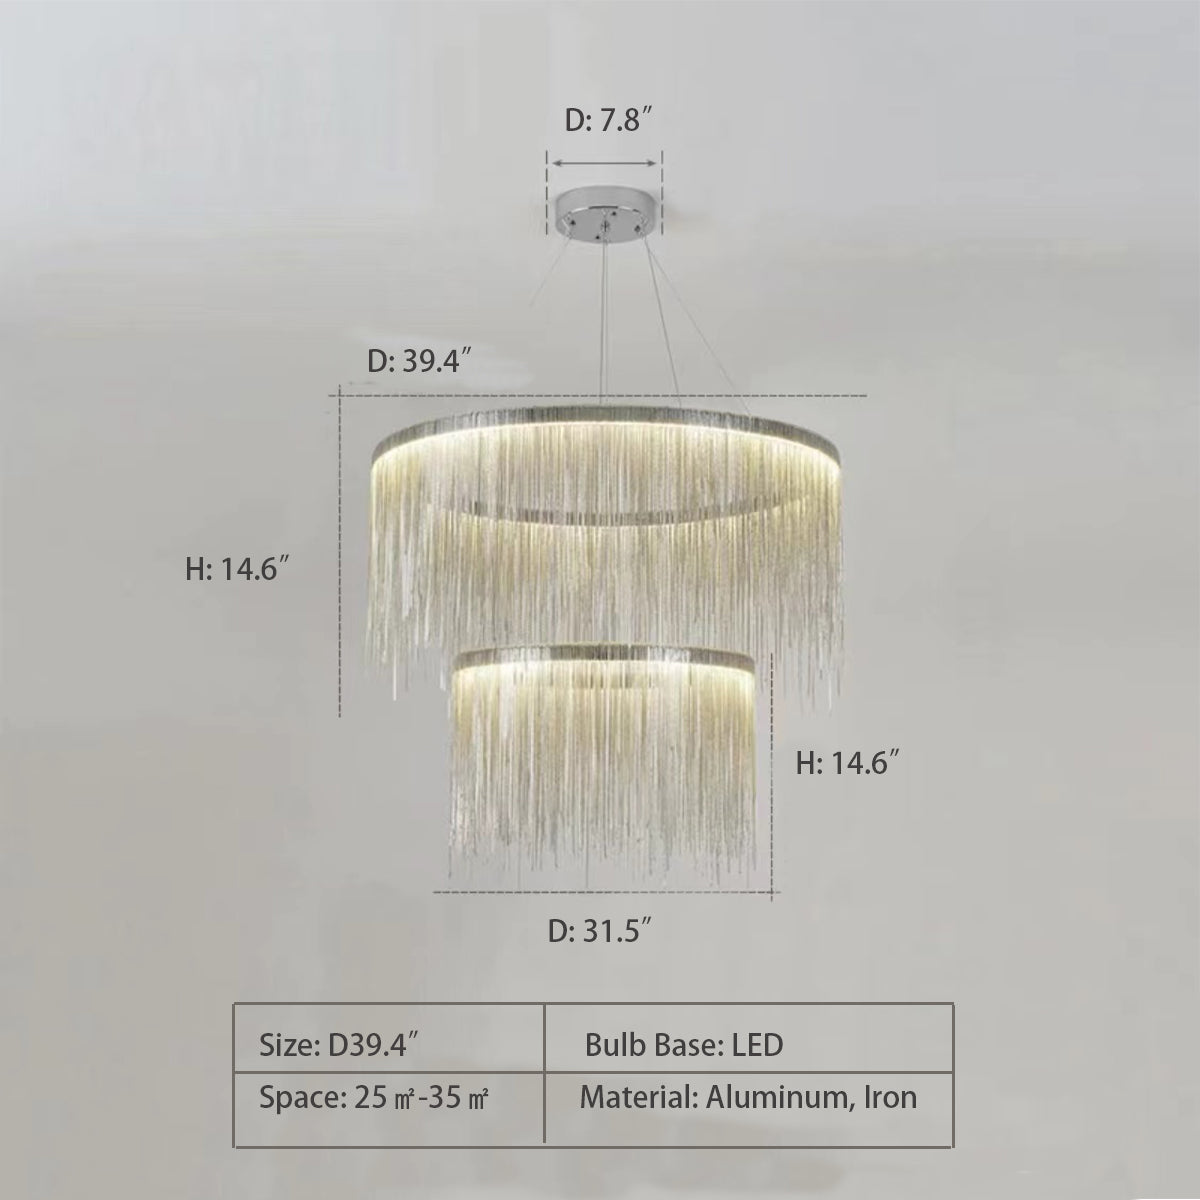 2 Layers: D39.4" String Light Chandelier - Round,chandelier,chandeliers,tassel,pendant,aluminum,round,classic,two layers,2 layers,big,huge,large,oversized,chain,living room,dining room,duplex,loft